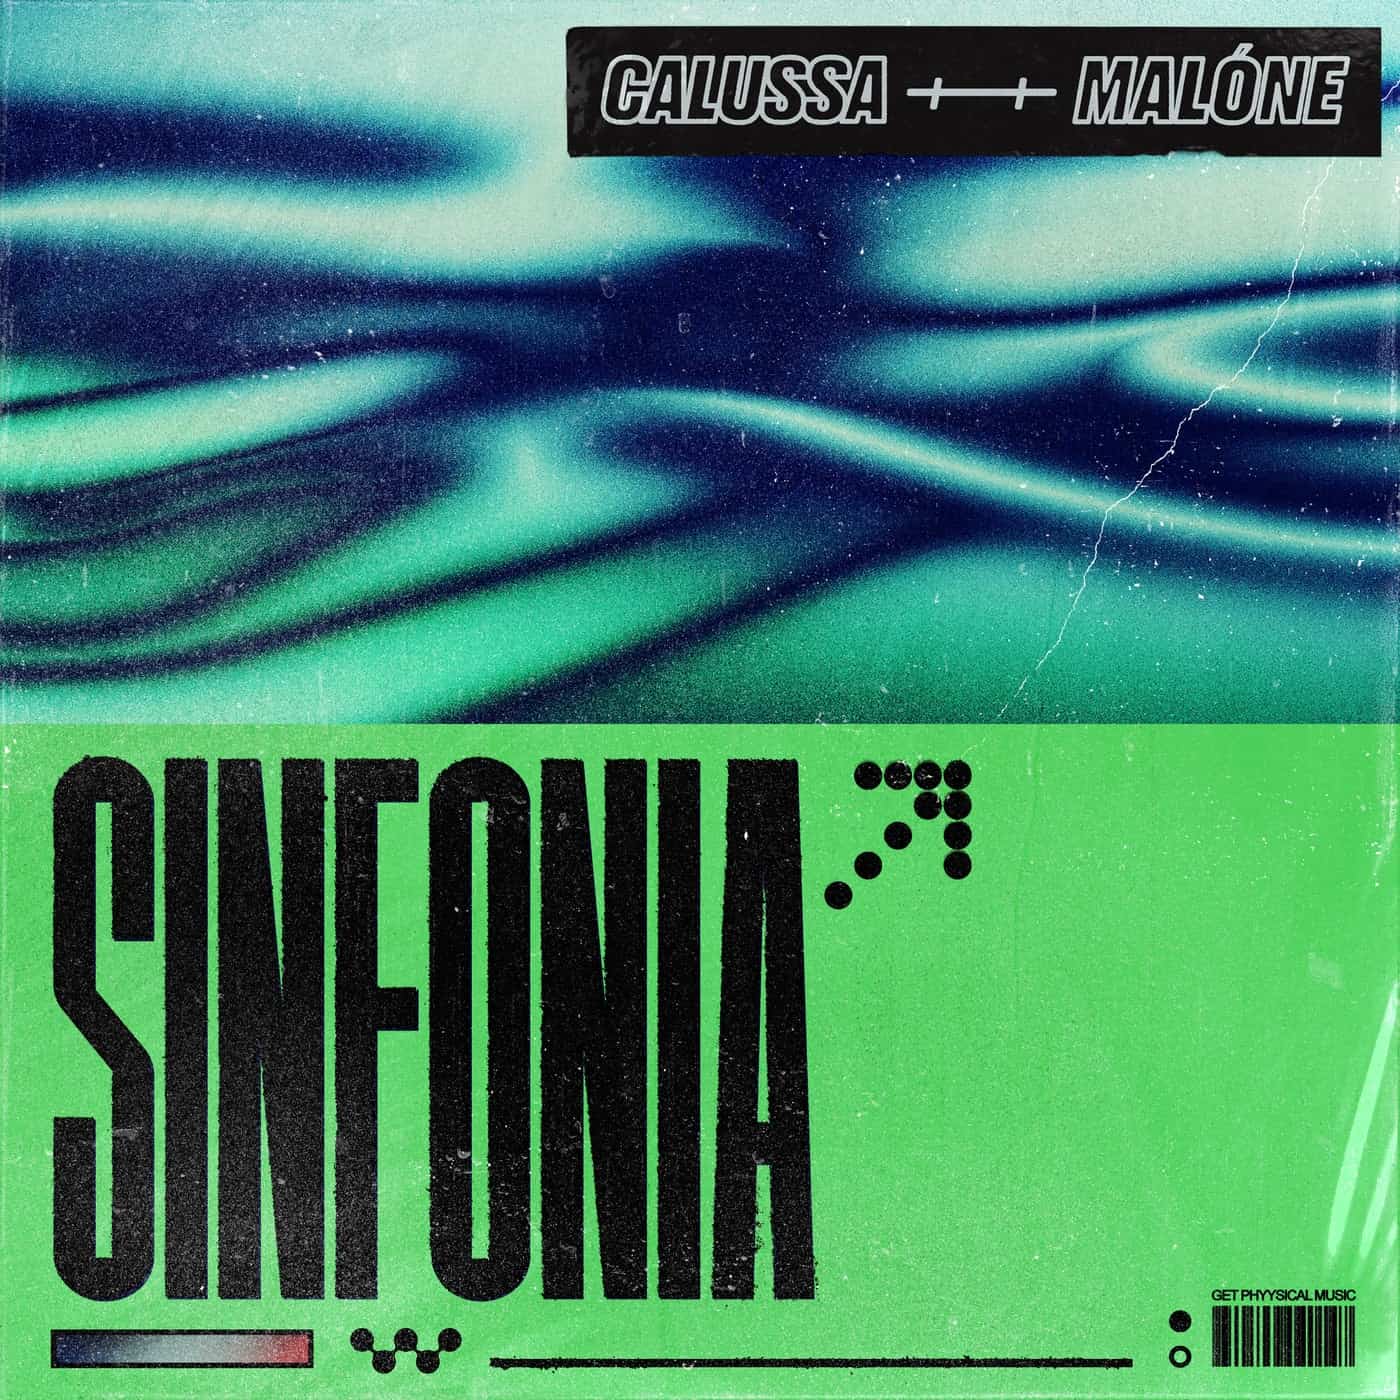 Download Malone, Calussa - Sinfonia on Electrobuzz